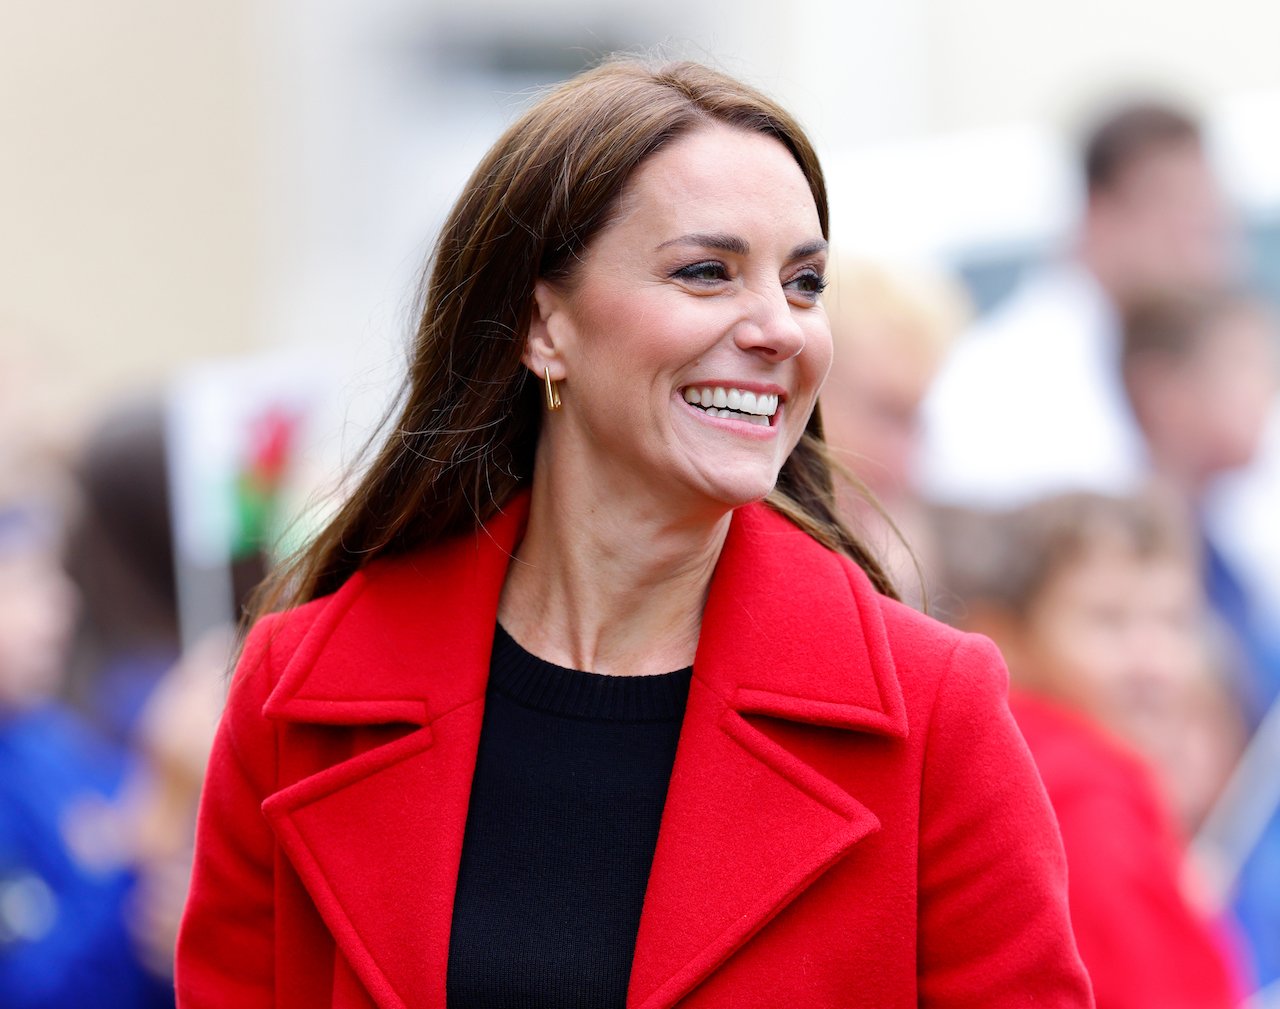 Kate Middleton made a bold fashion statement after the queen's death